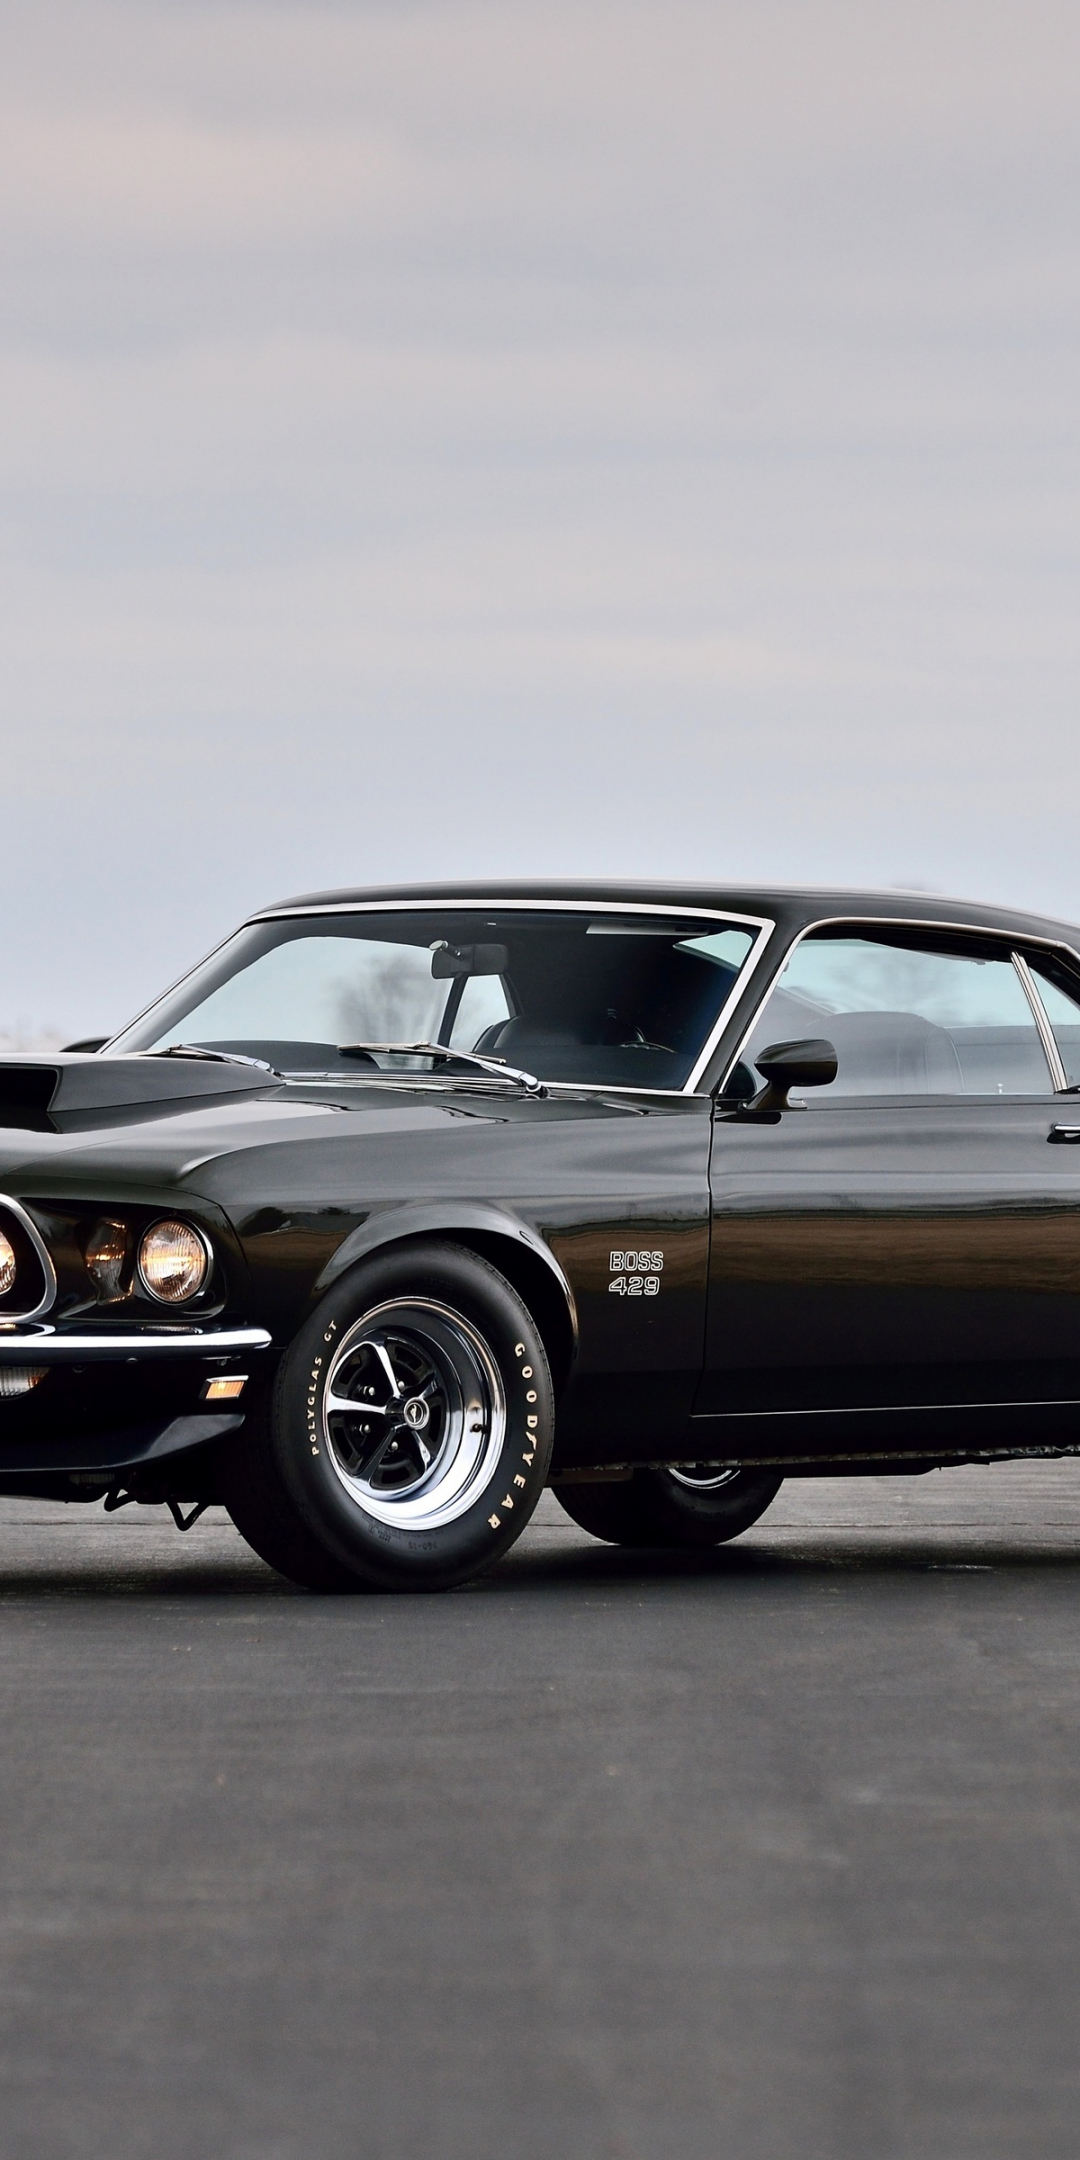 On road, 1969 Ford Mustang Boss 429, black, muscle car, 1080x2160 wallpaper